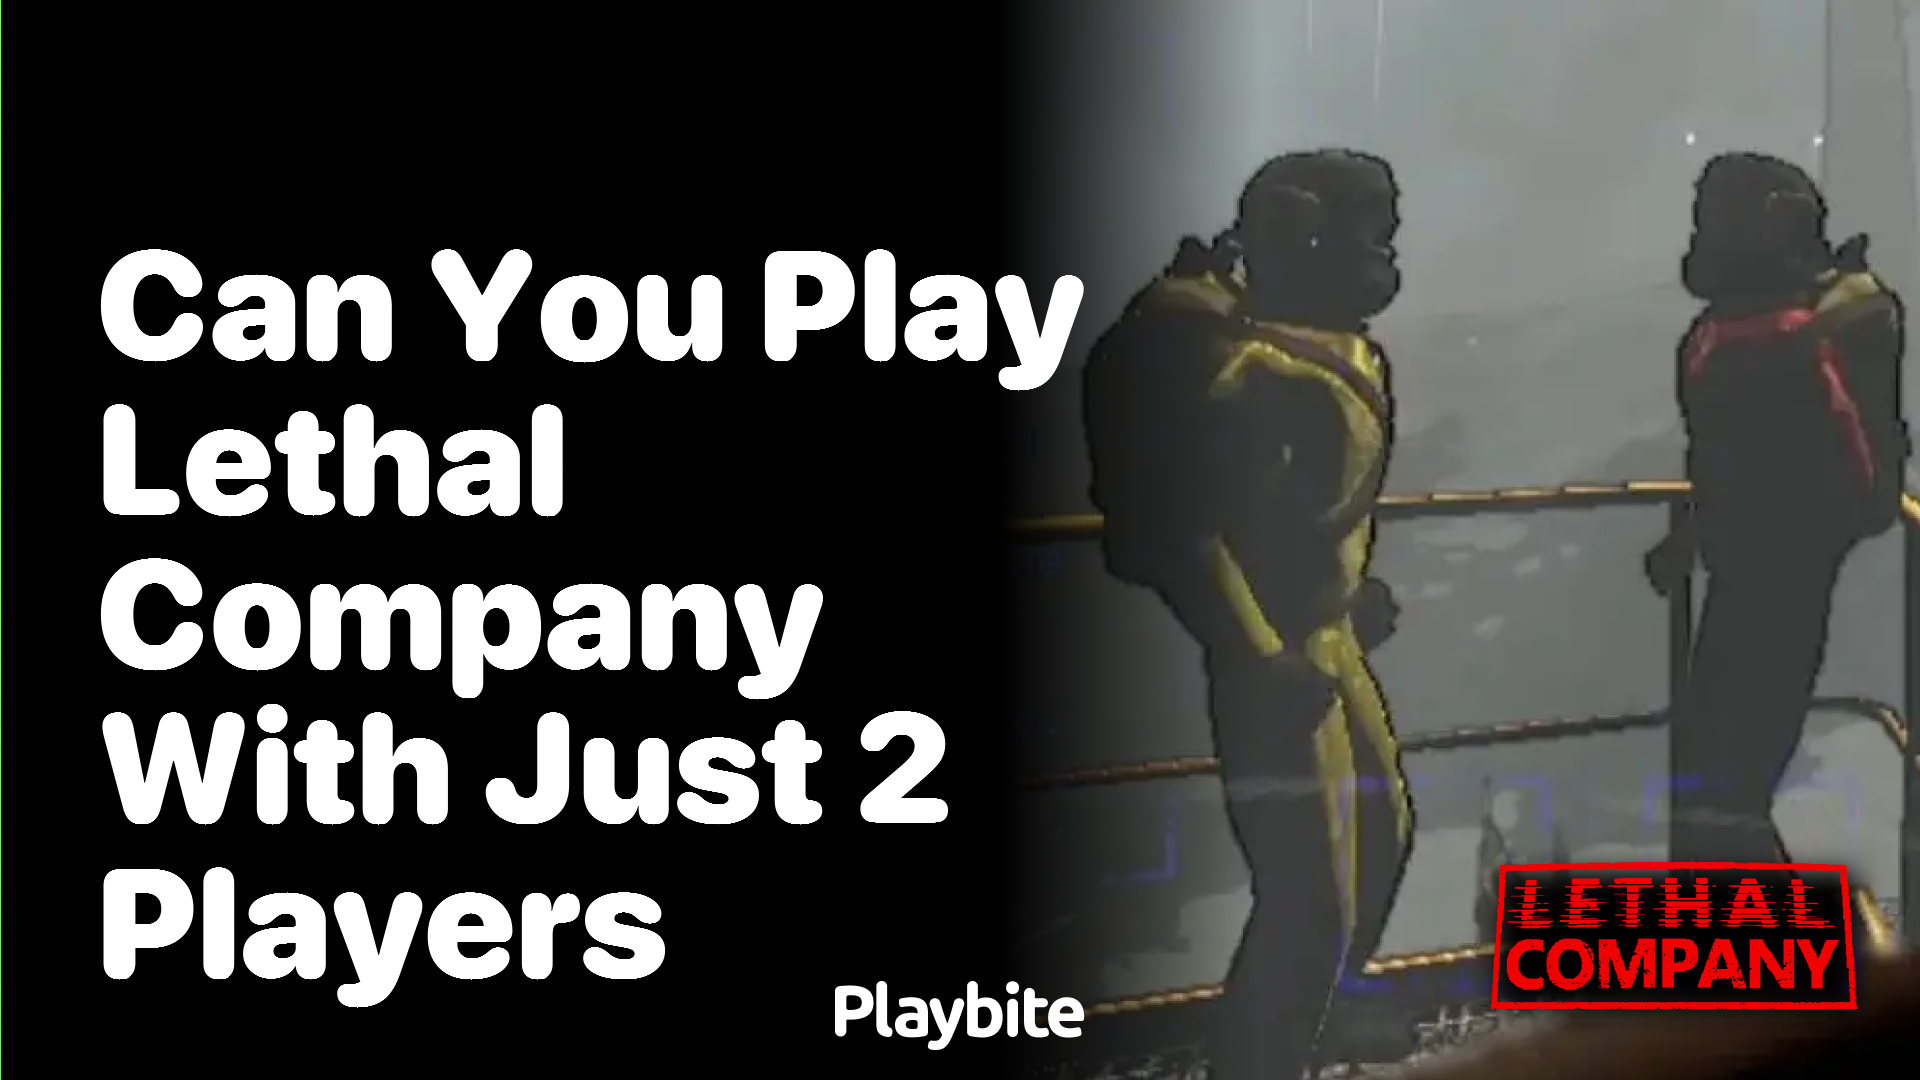 Can You Play Lethal Company With Just 2 Players?